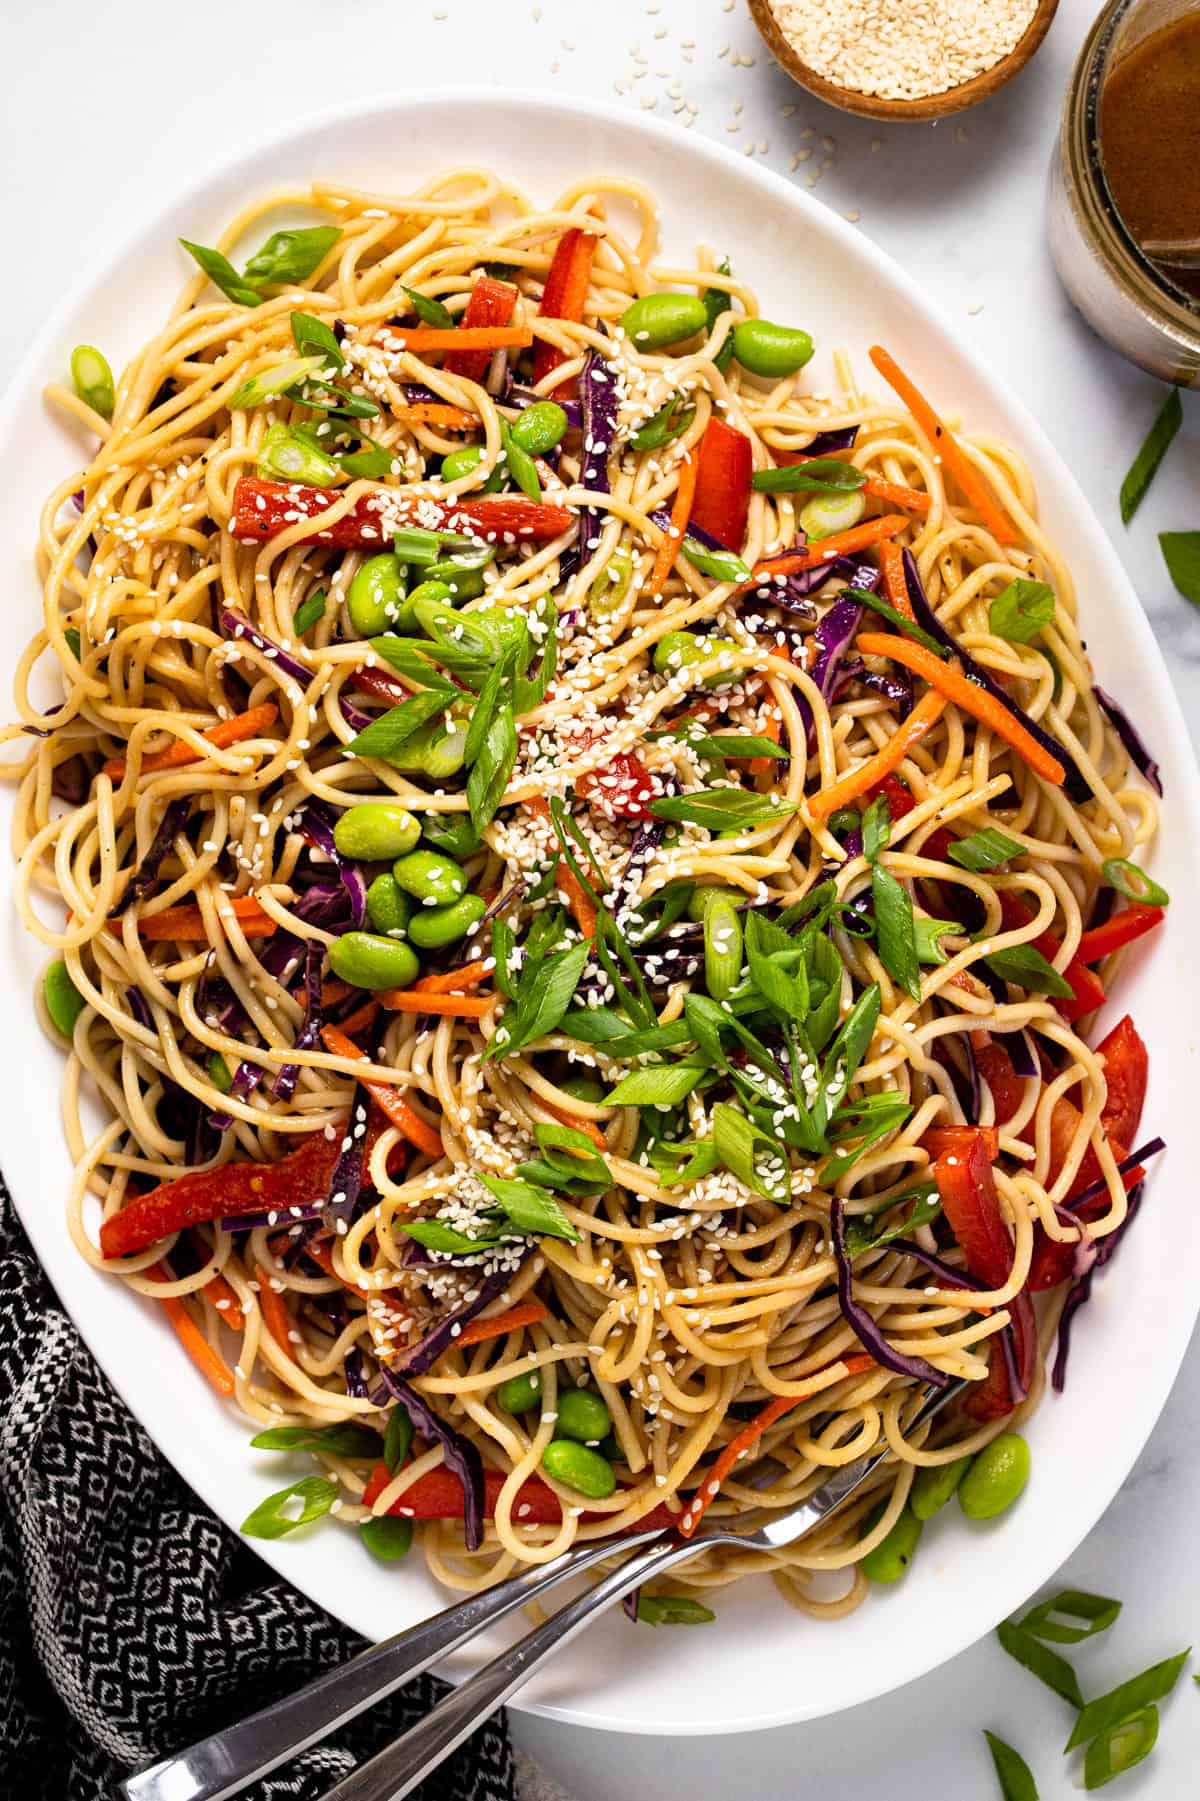 Large white serving platter filled with sesame noodle salad garnished with green onions